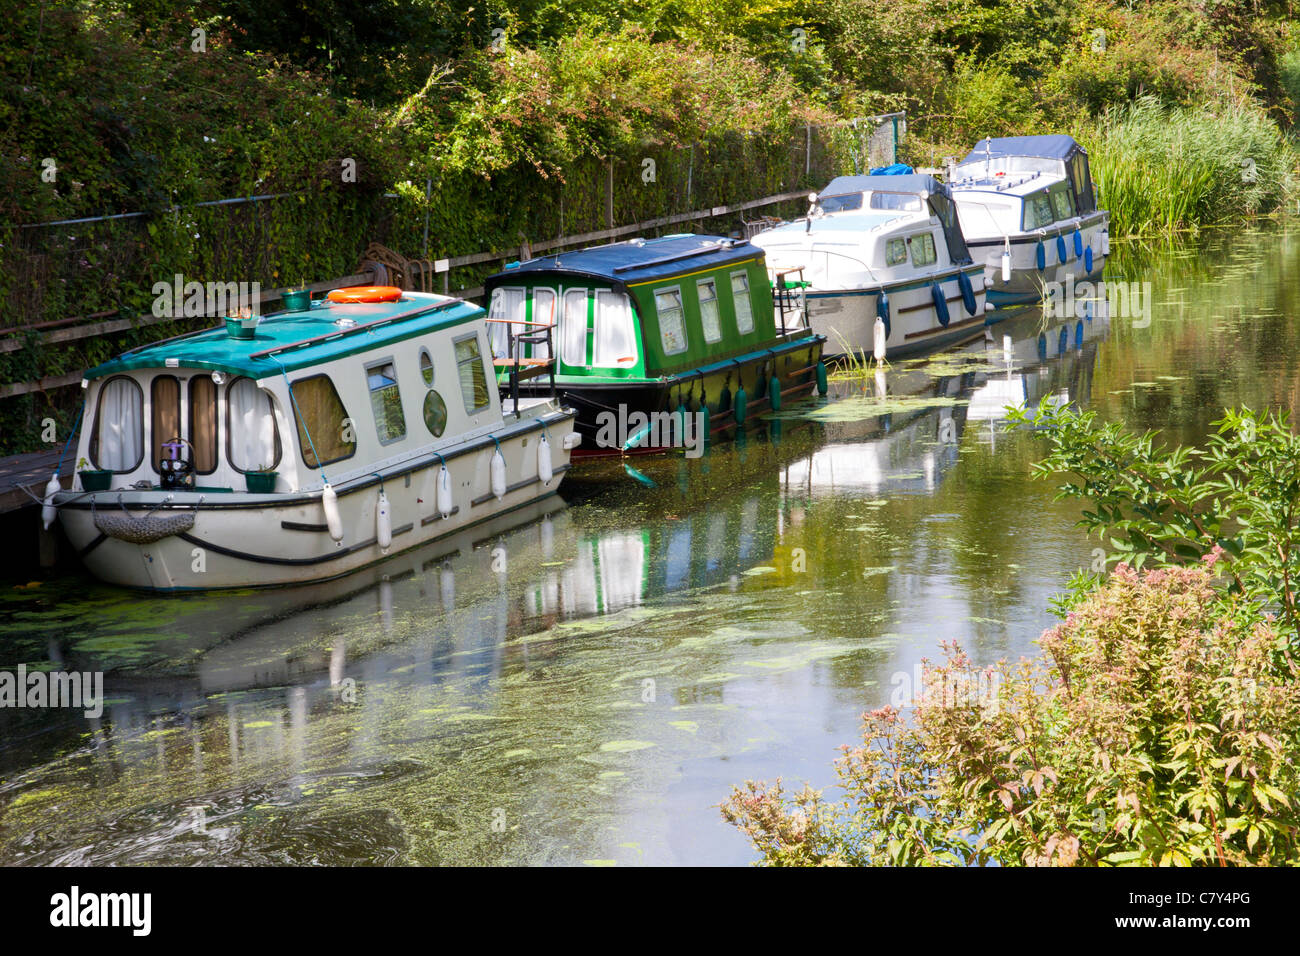 Boats moored on an English Canal Stock Photo